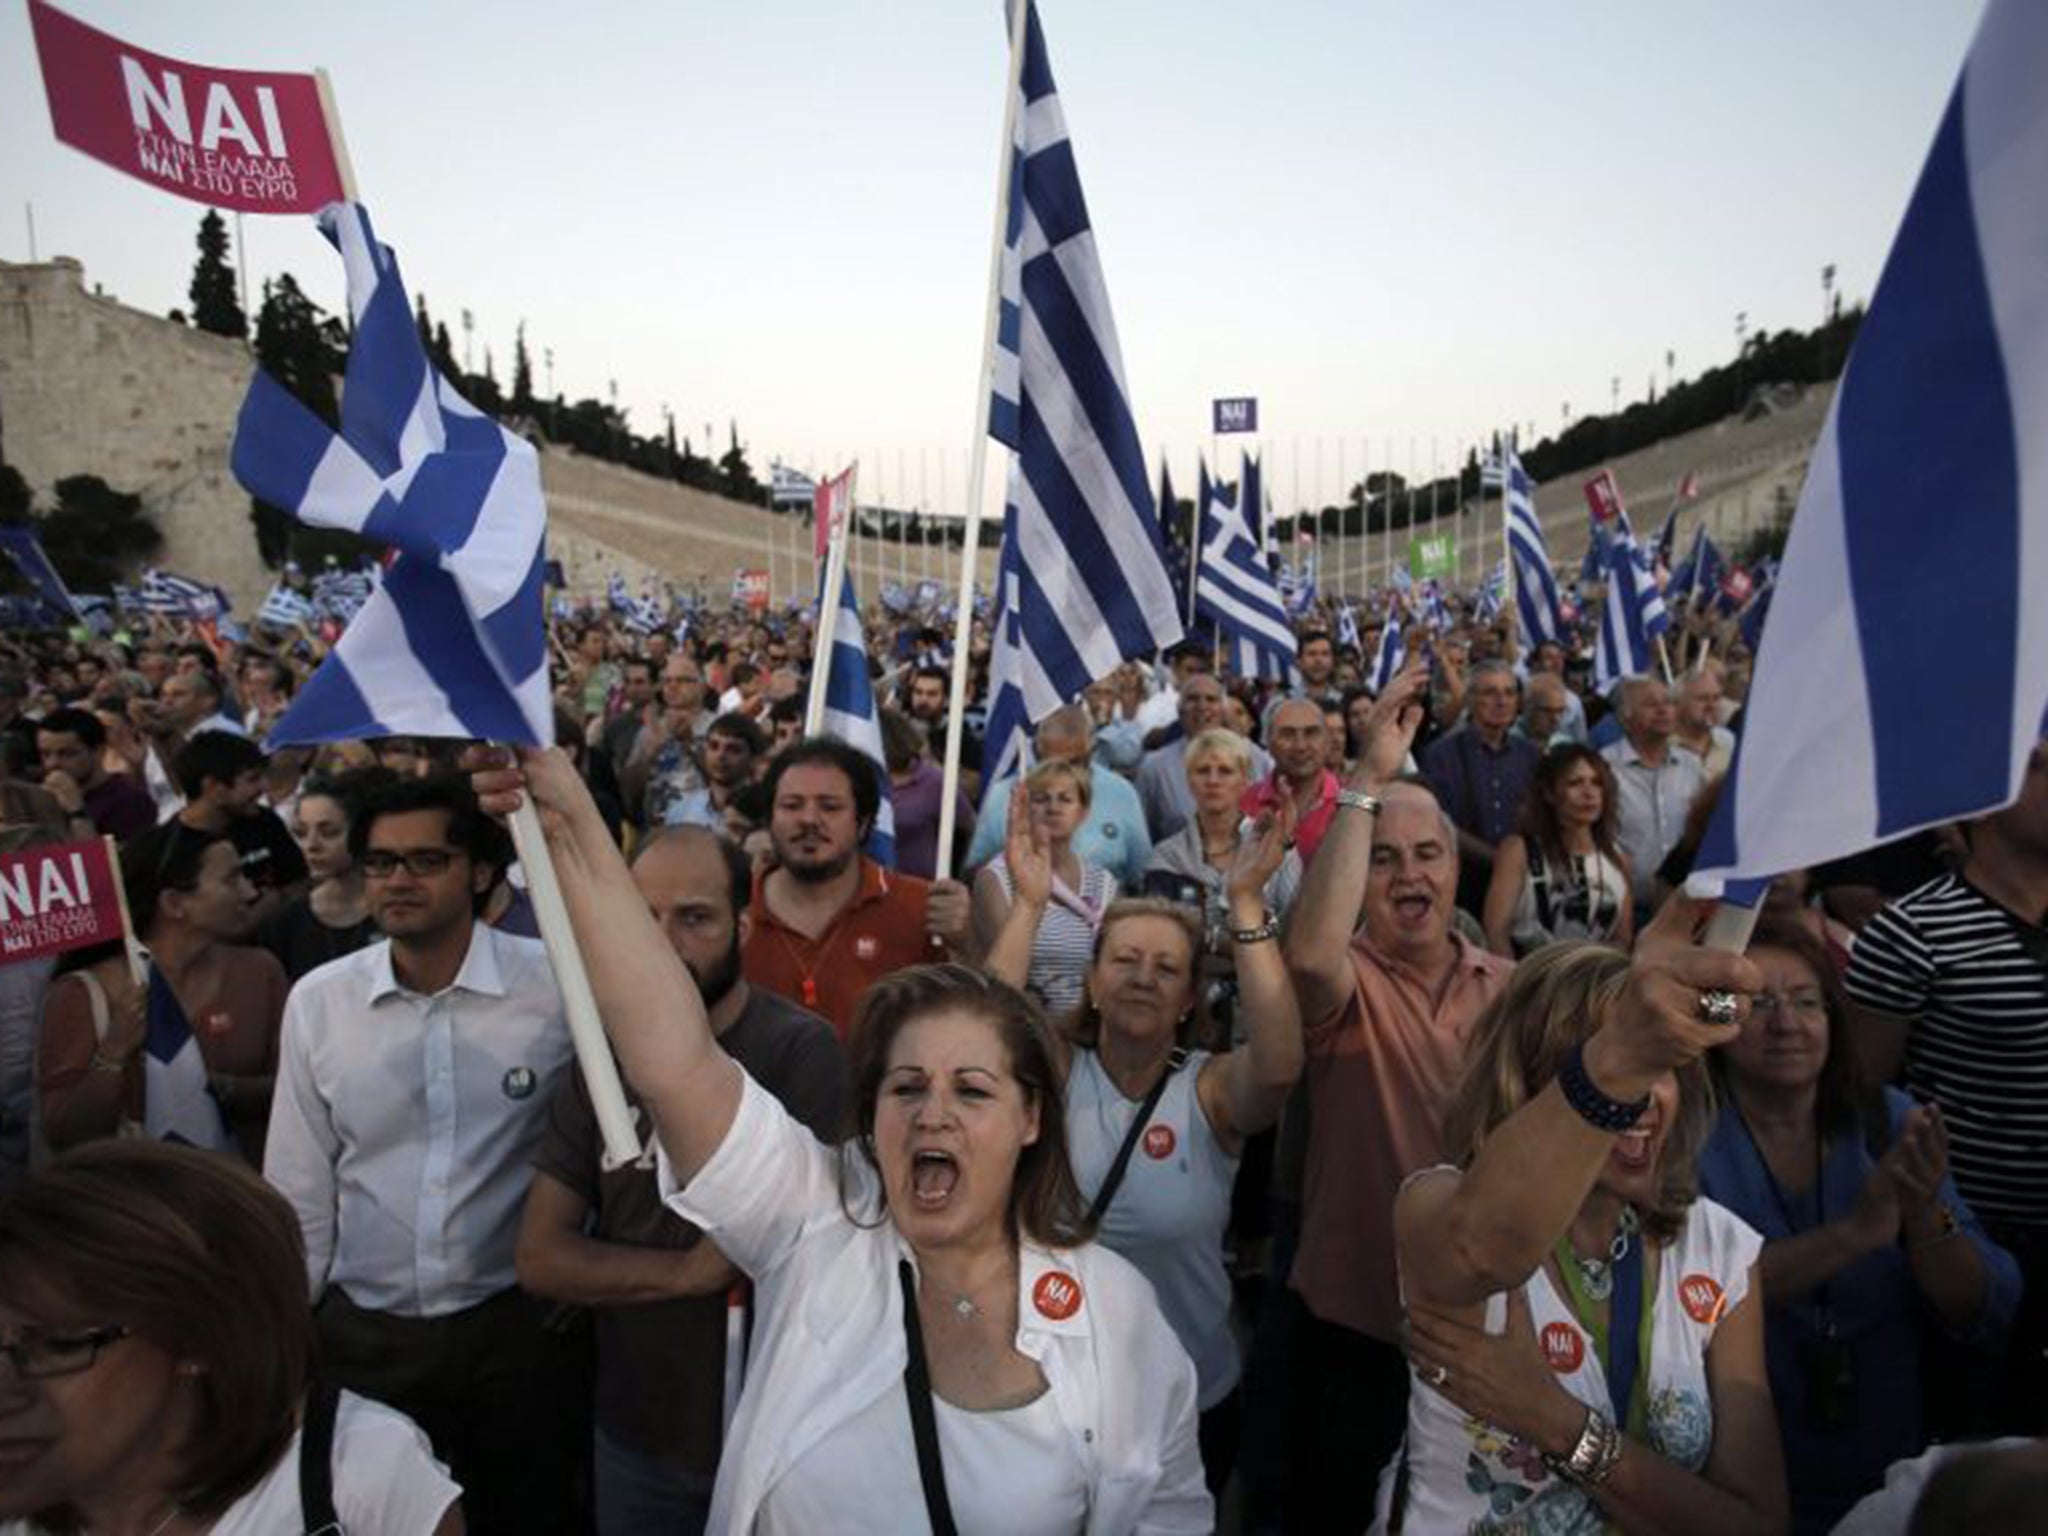 A Yes vote rally in Athens ahead of the referendum